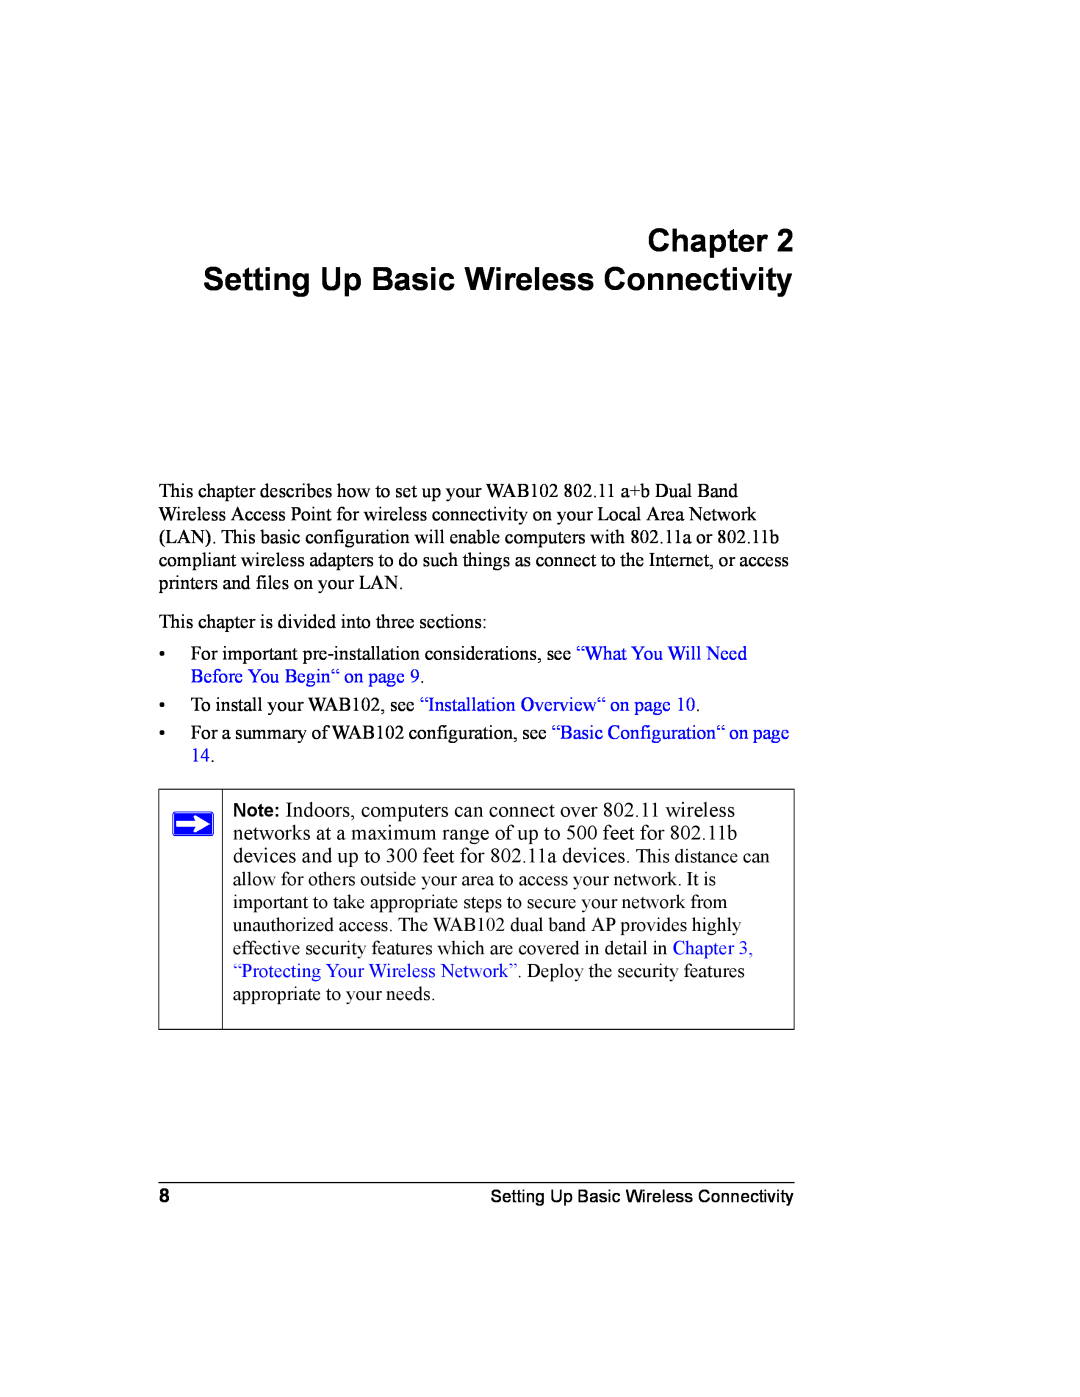 NETGEAR manual Setting Up Basic Wireless Connectivity, To install your WAB102, see “Installation Overview“ on page 